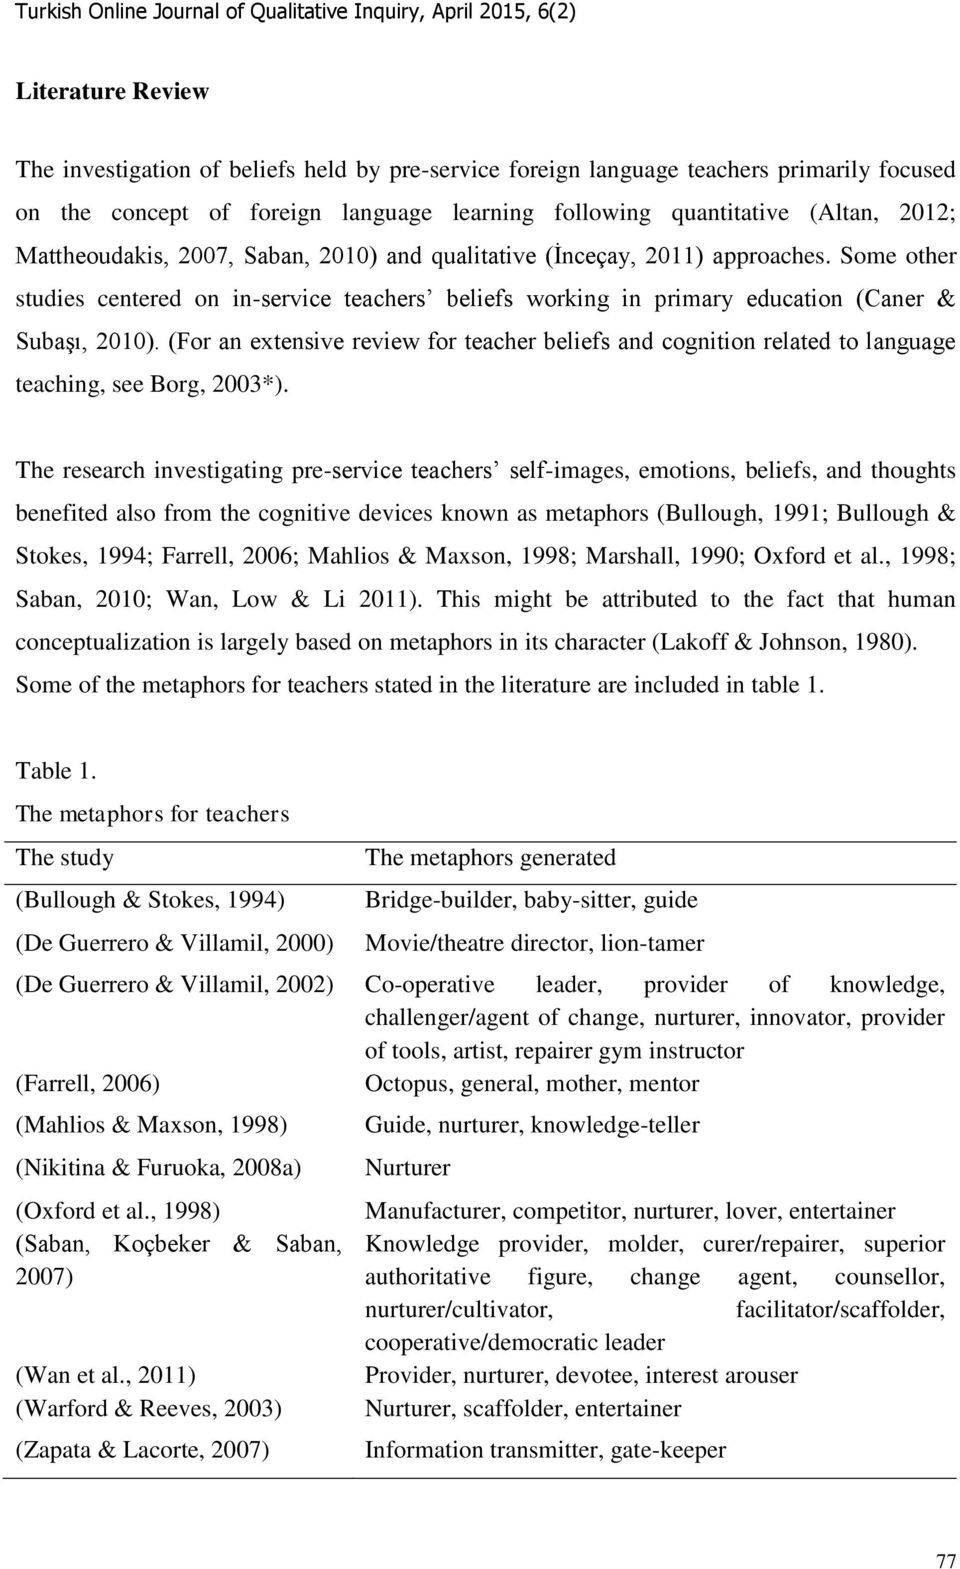 (For an extensive review for teacher beliefs and cognition related to language teaching, see Borg, 2003*).